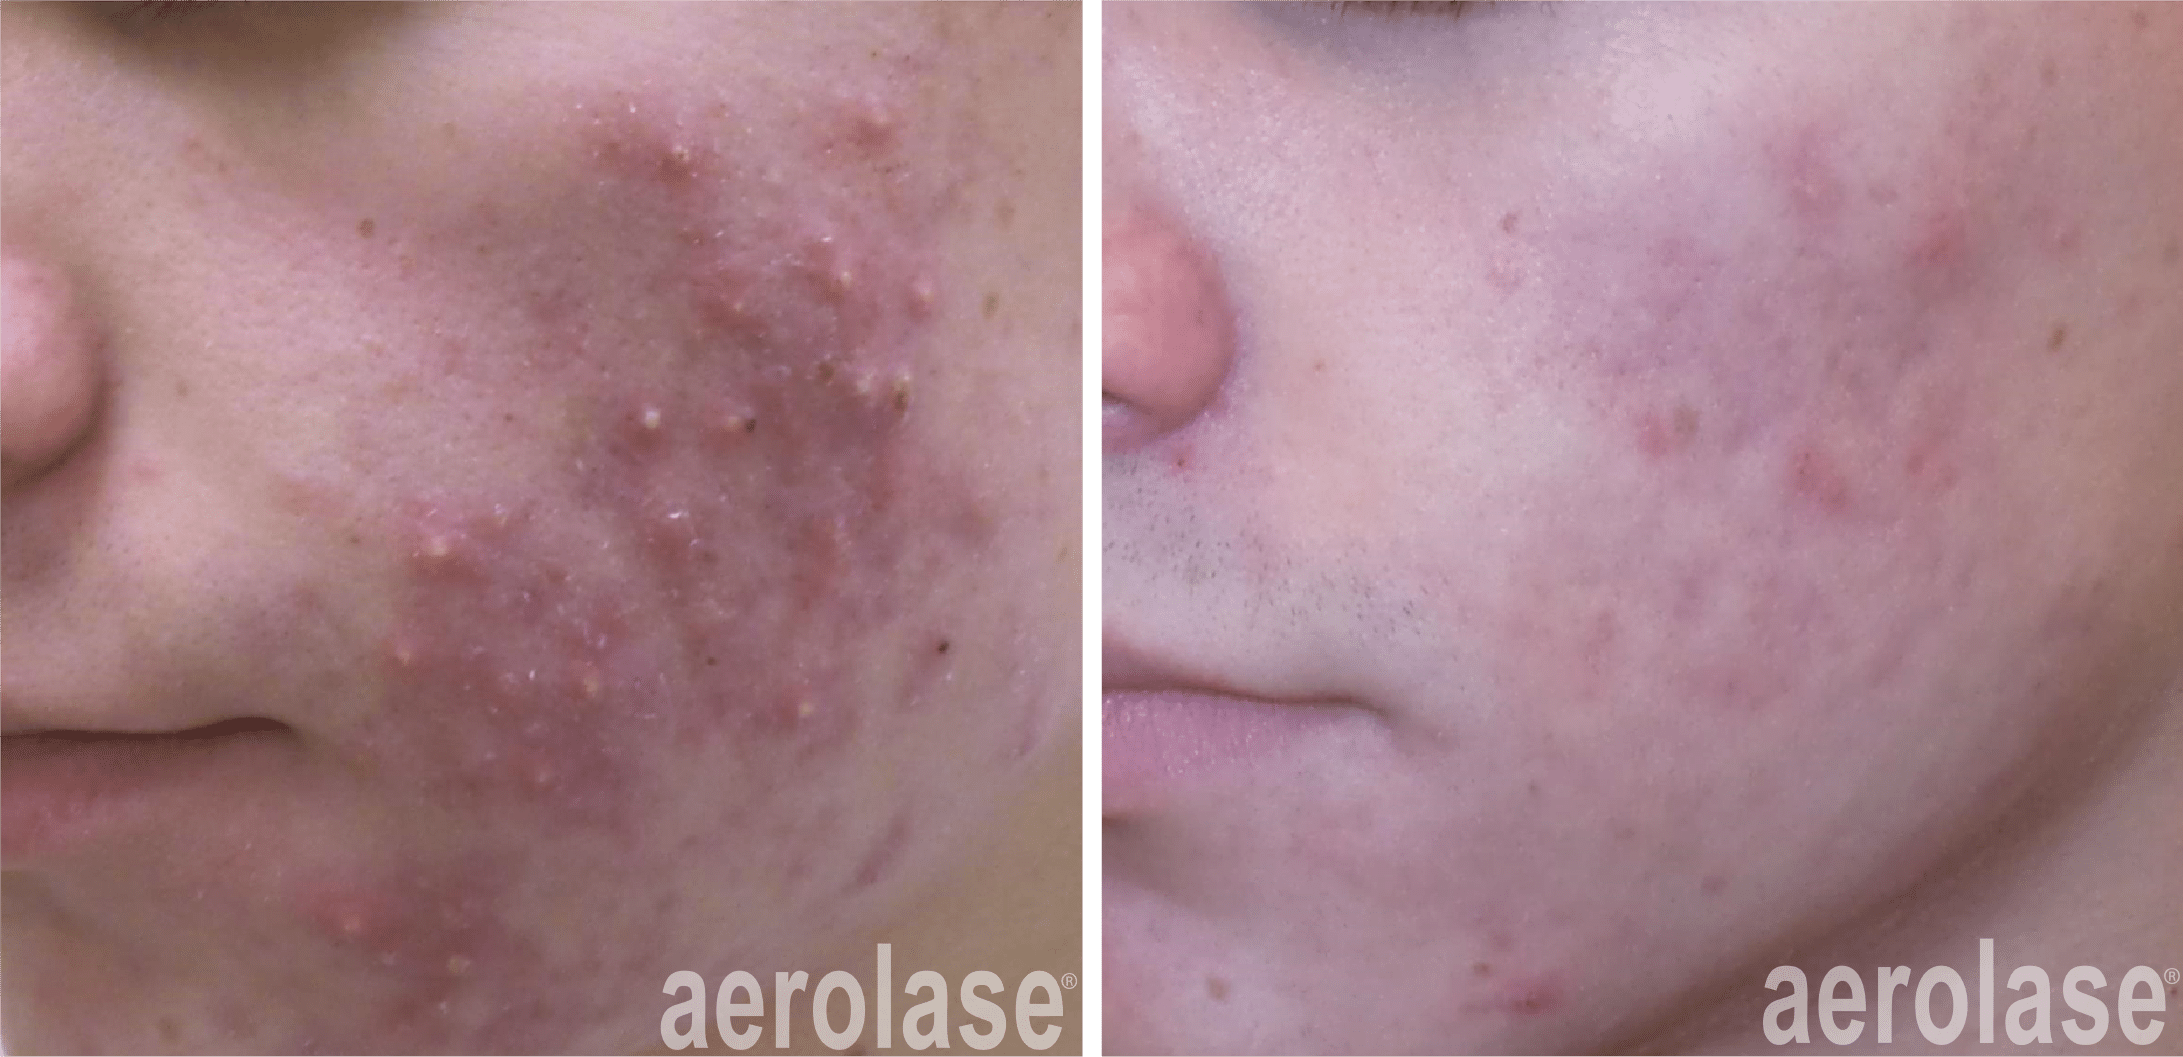 Aerolase before and after treatment